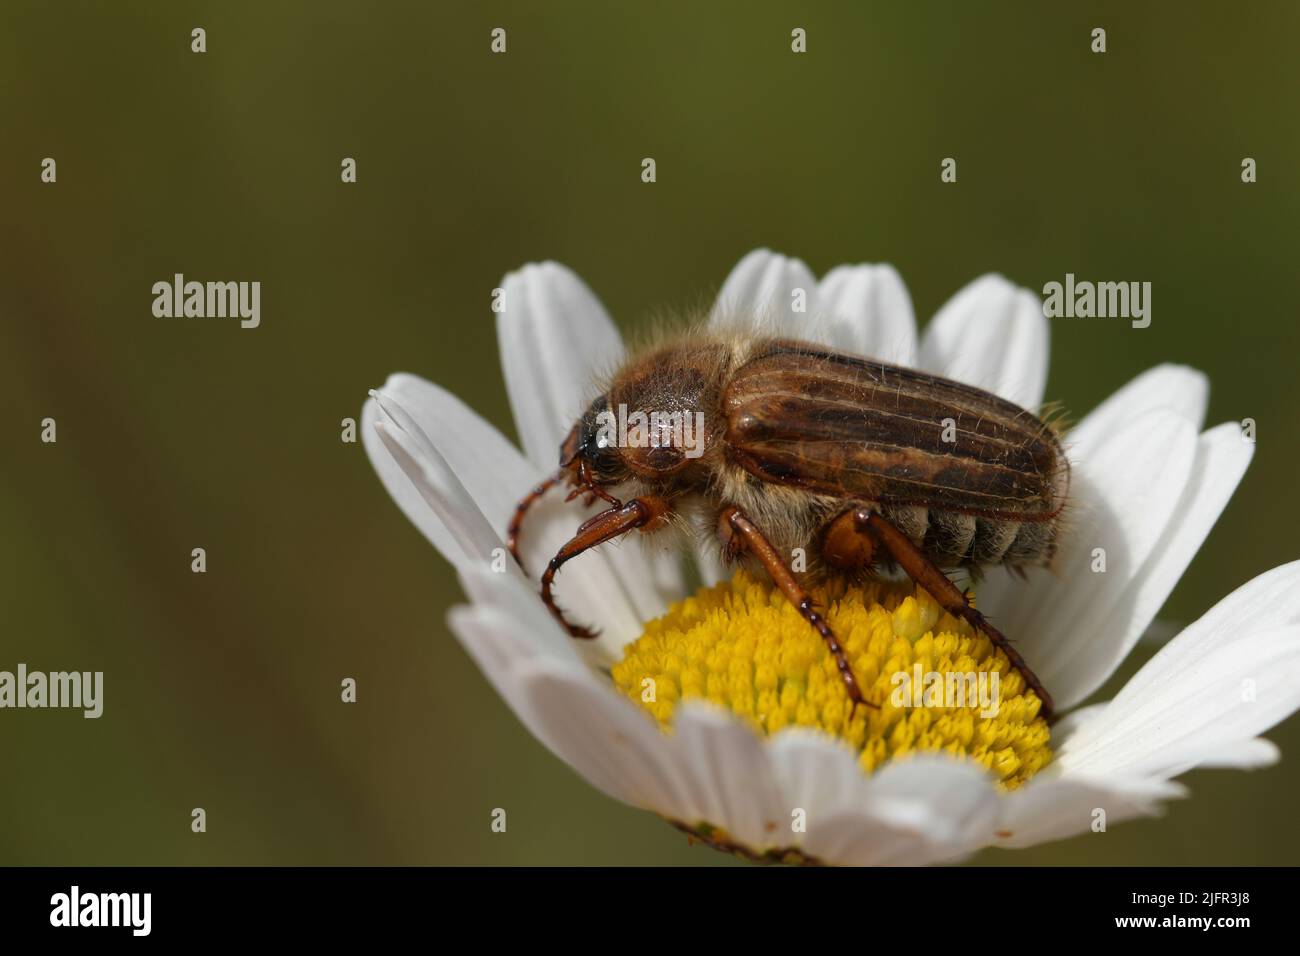 A Summer Chafer Beetle, Amphimallon solstitialis, on an ox-eye daisy flower in a meadow. Stock Photo